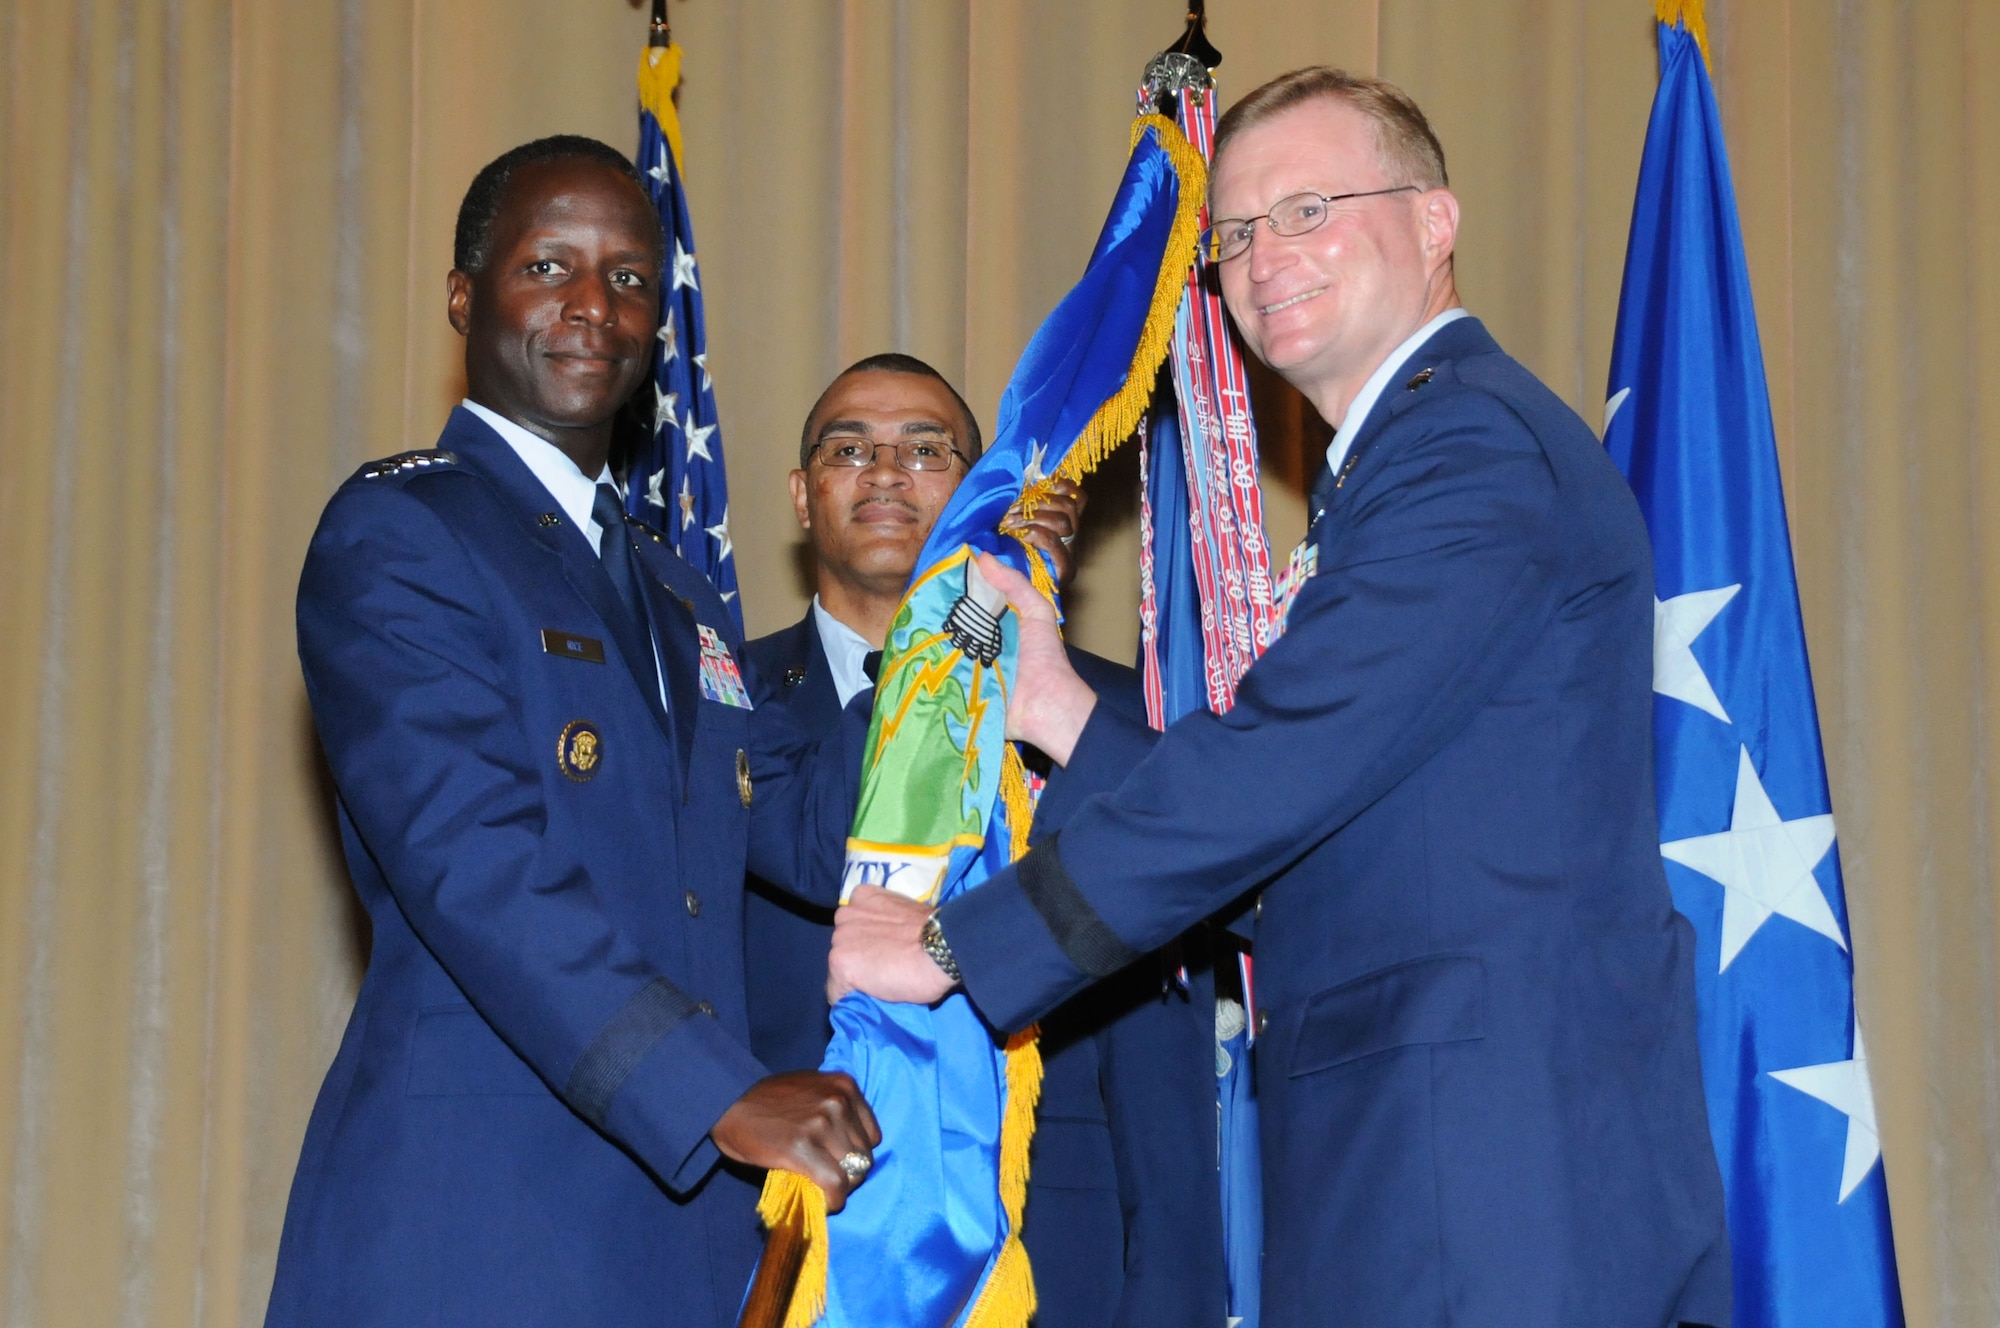 Air Education and Training Command Commander Gen. Edward Rice Jr. hands the Air University guidon to Lt. Gen. David Fadok, new Air University commander and president, during a change of command ceremony Aug. 12. (Air Force photo/Chris Baldwin)